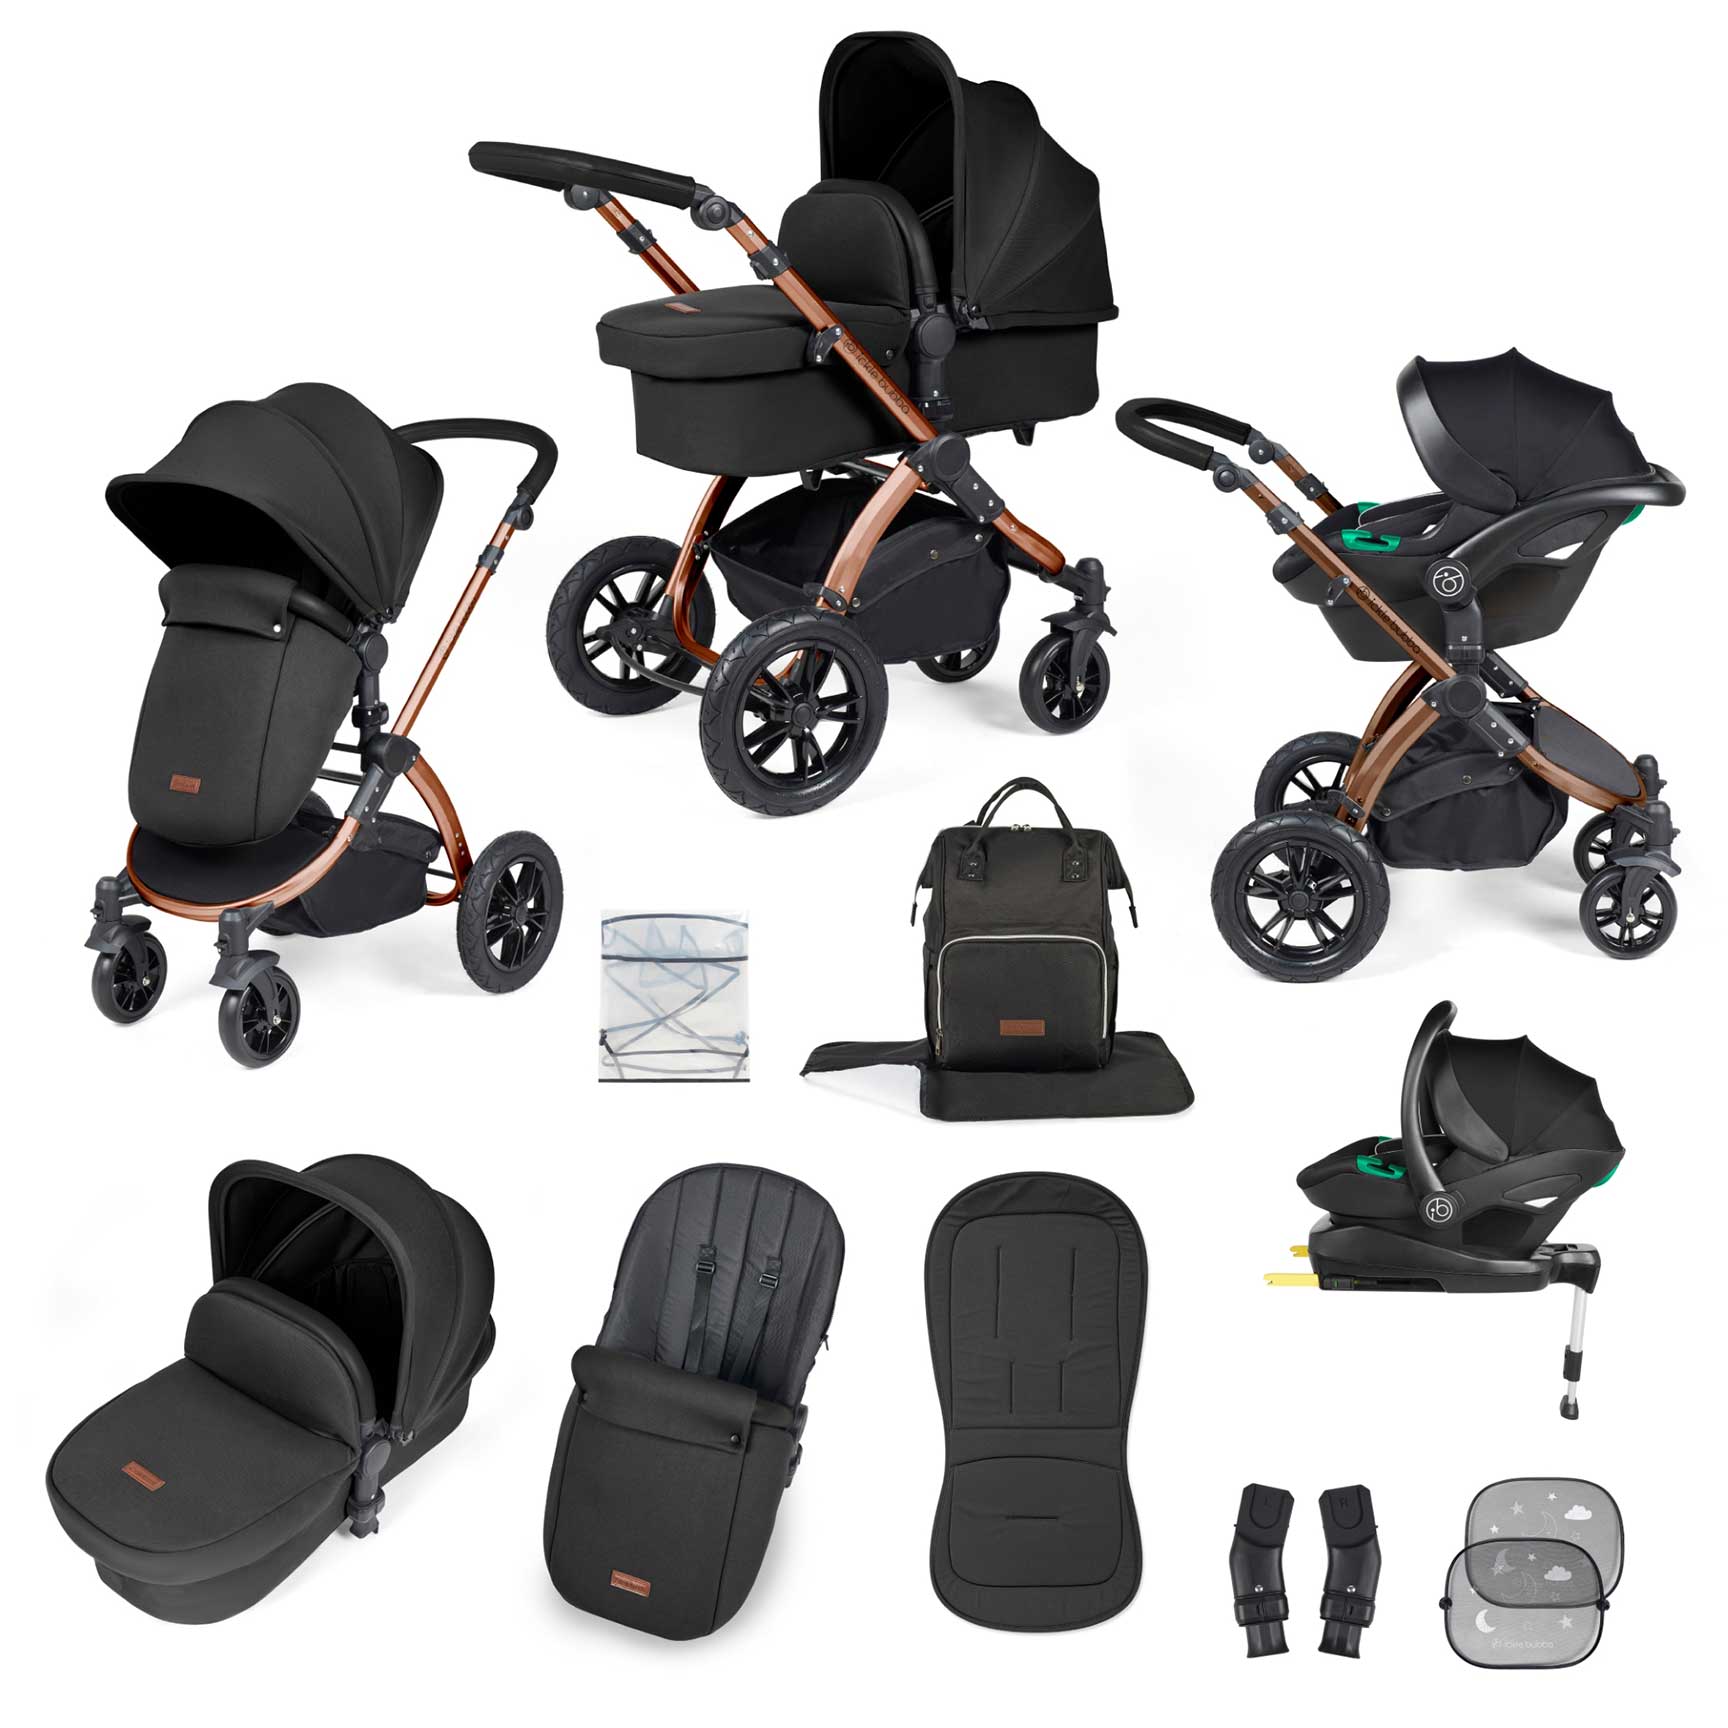 Ickle Bubba travel systems Ickle Bubba Stomp Luxe All-in-One Travel System with Isofix Base - Bronze/Midnight/Black 10-011-300-139